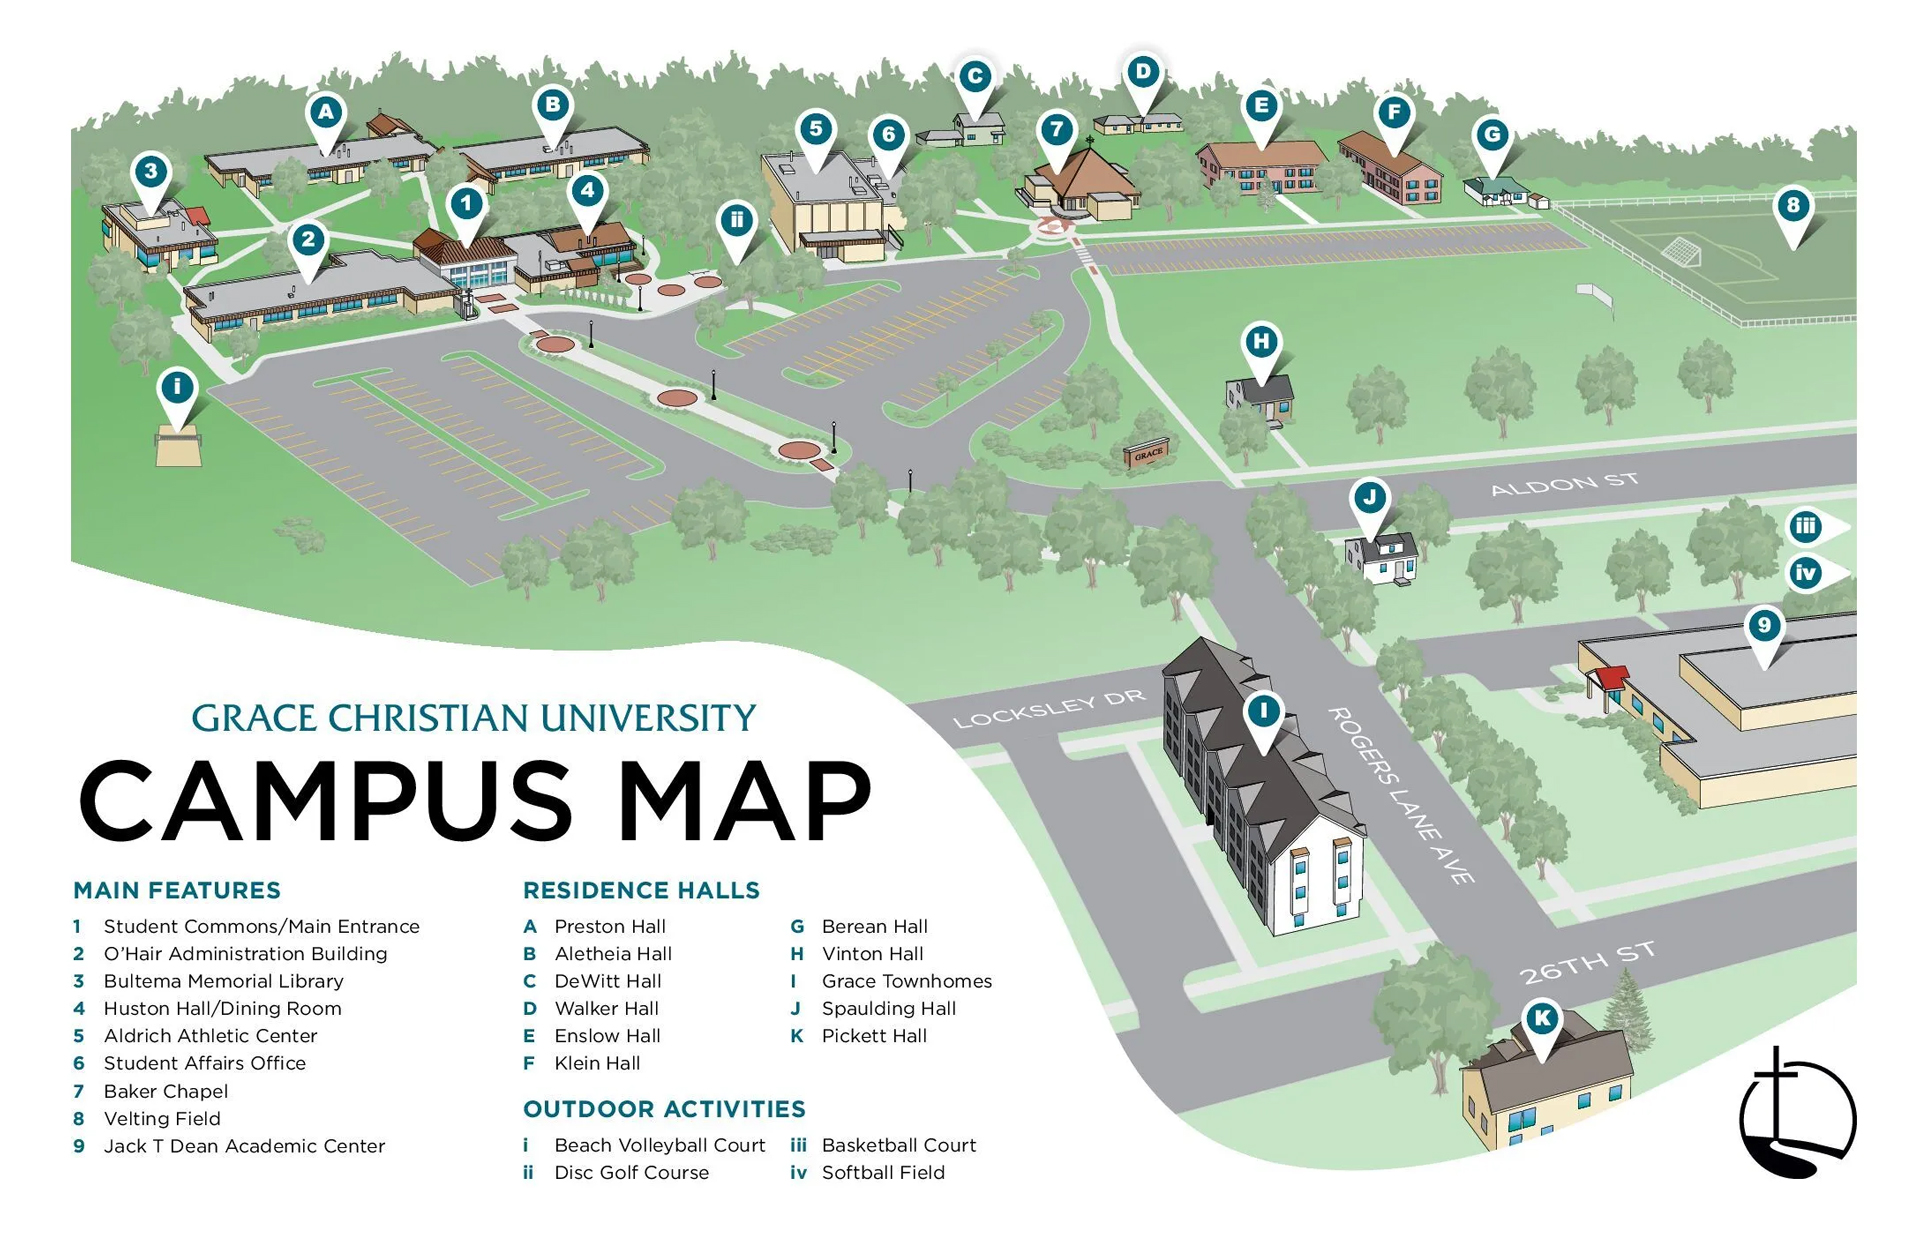 Grace Christian University Campus Map showing Main Features and Buildings, Residence Halls, and Outdoor Activities